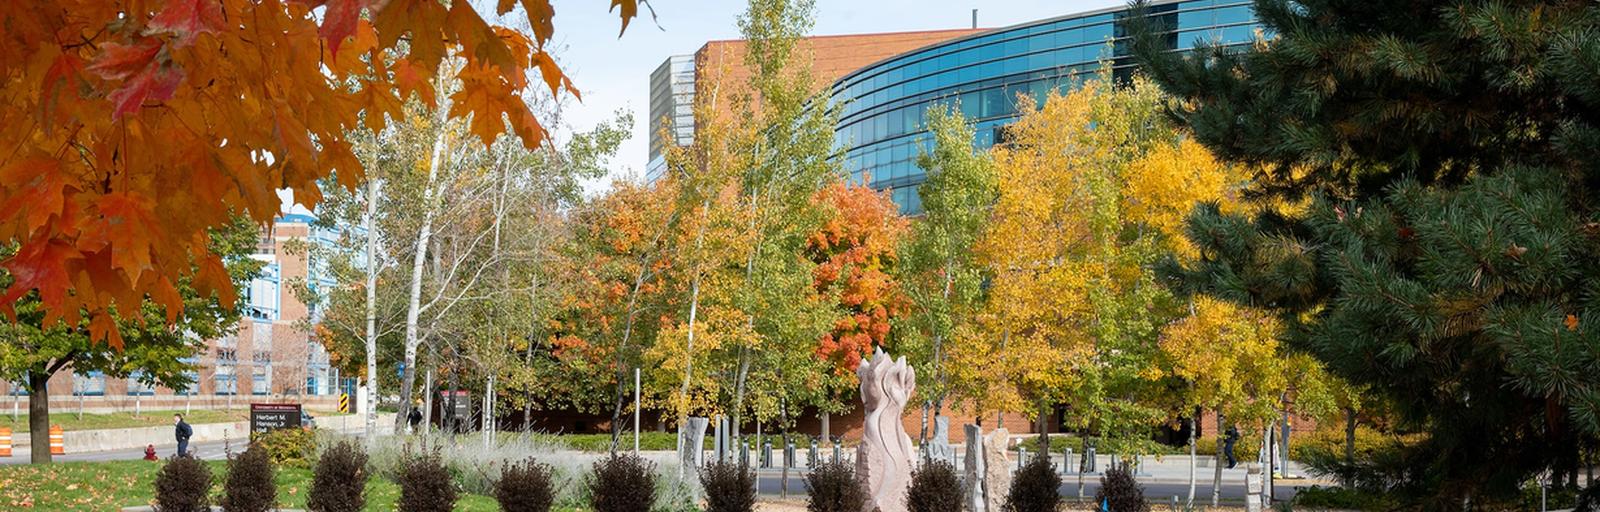 Image of the Carlson School of Management building through tress full of colorful fall leaves.